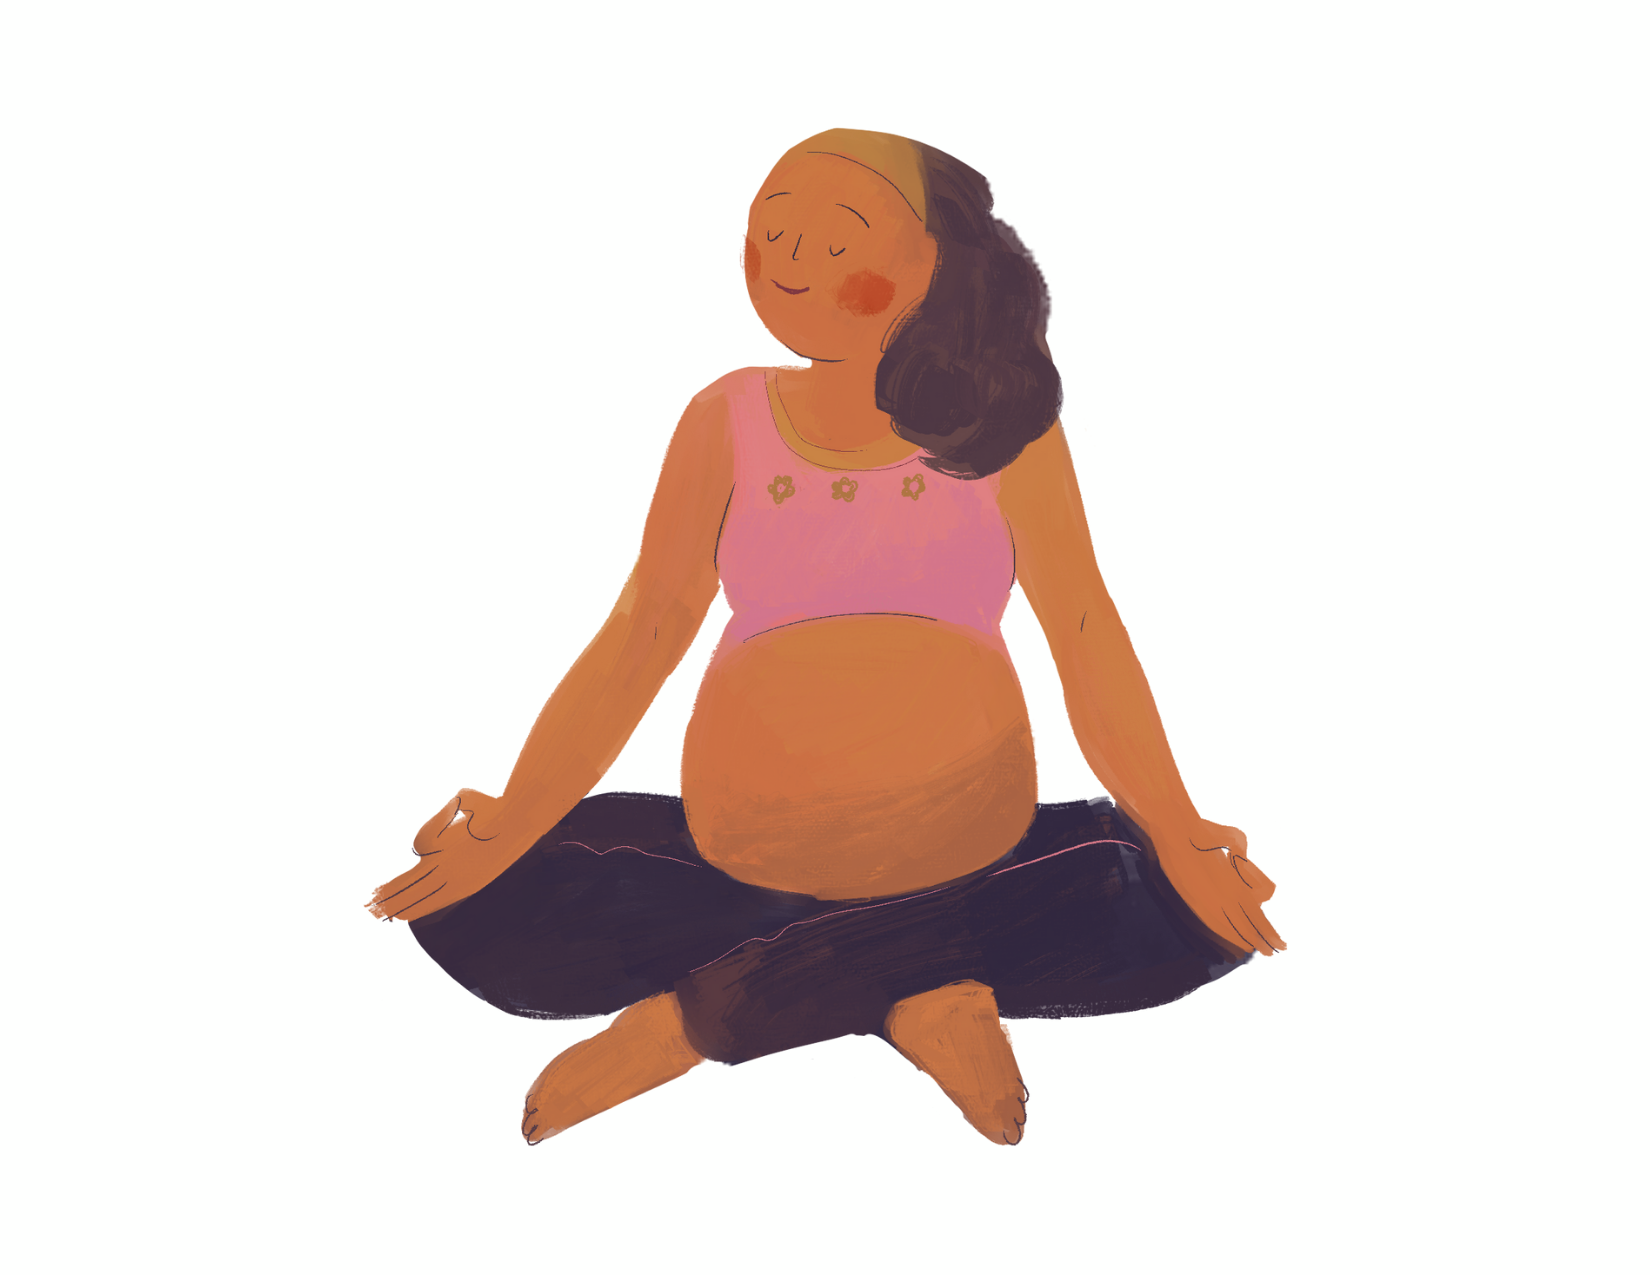 illustrated image of pregnant person sitting in a yoga Easy or Sukhasana pose